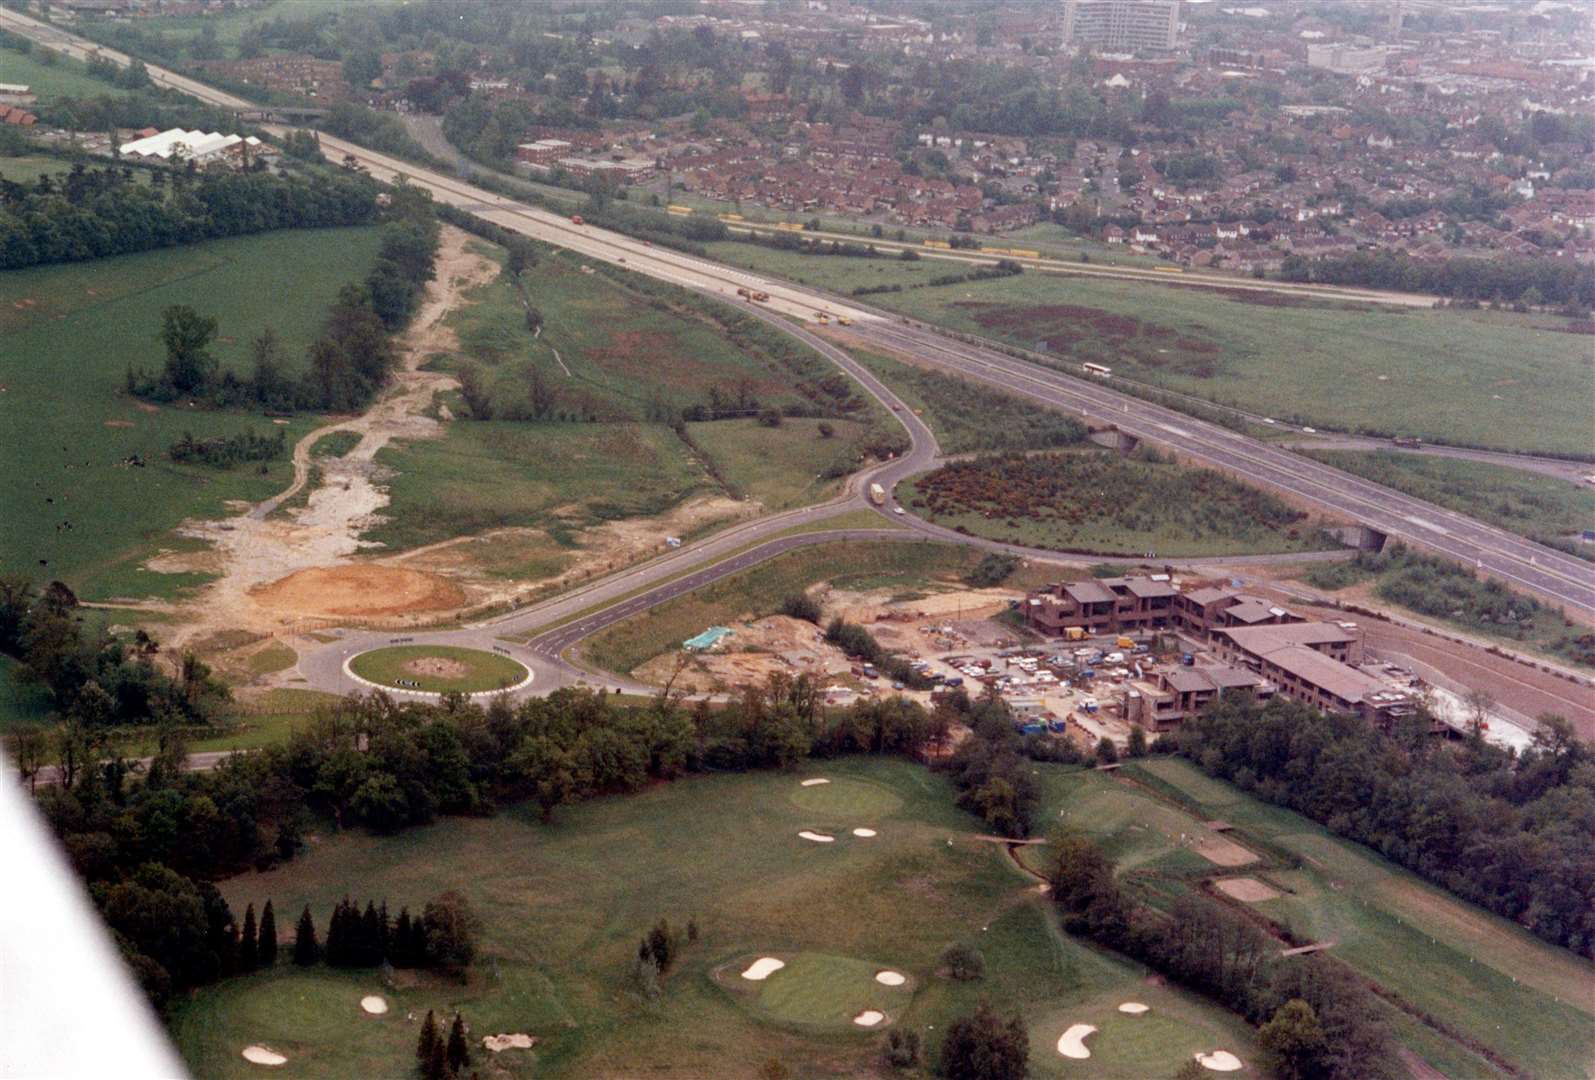 Eurogate Business Park, in the bottom right, under construction in 1991. The open expanse on the left later becomes Eureka Leisure park. Sainsbury's is also yet to be built, as can be seen in the right of the right of the picture. Pic: Steve Salter